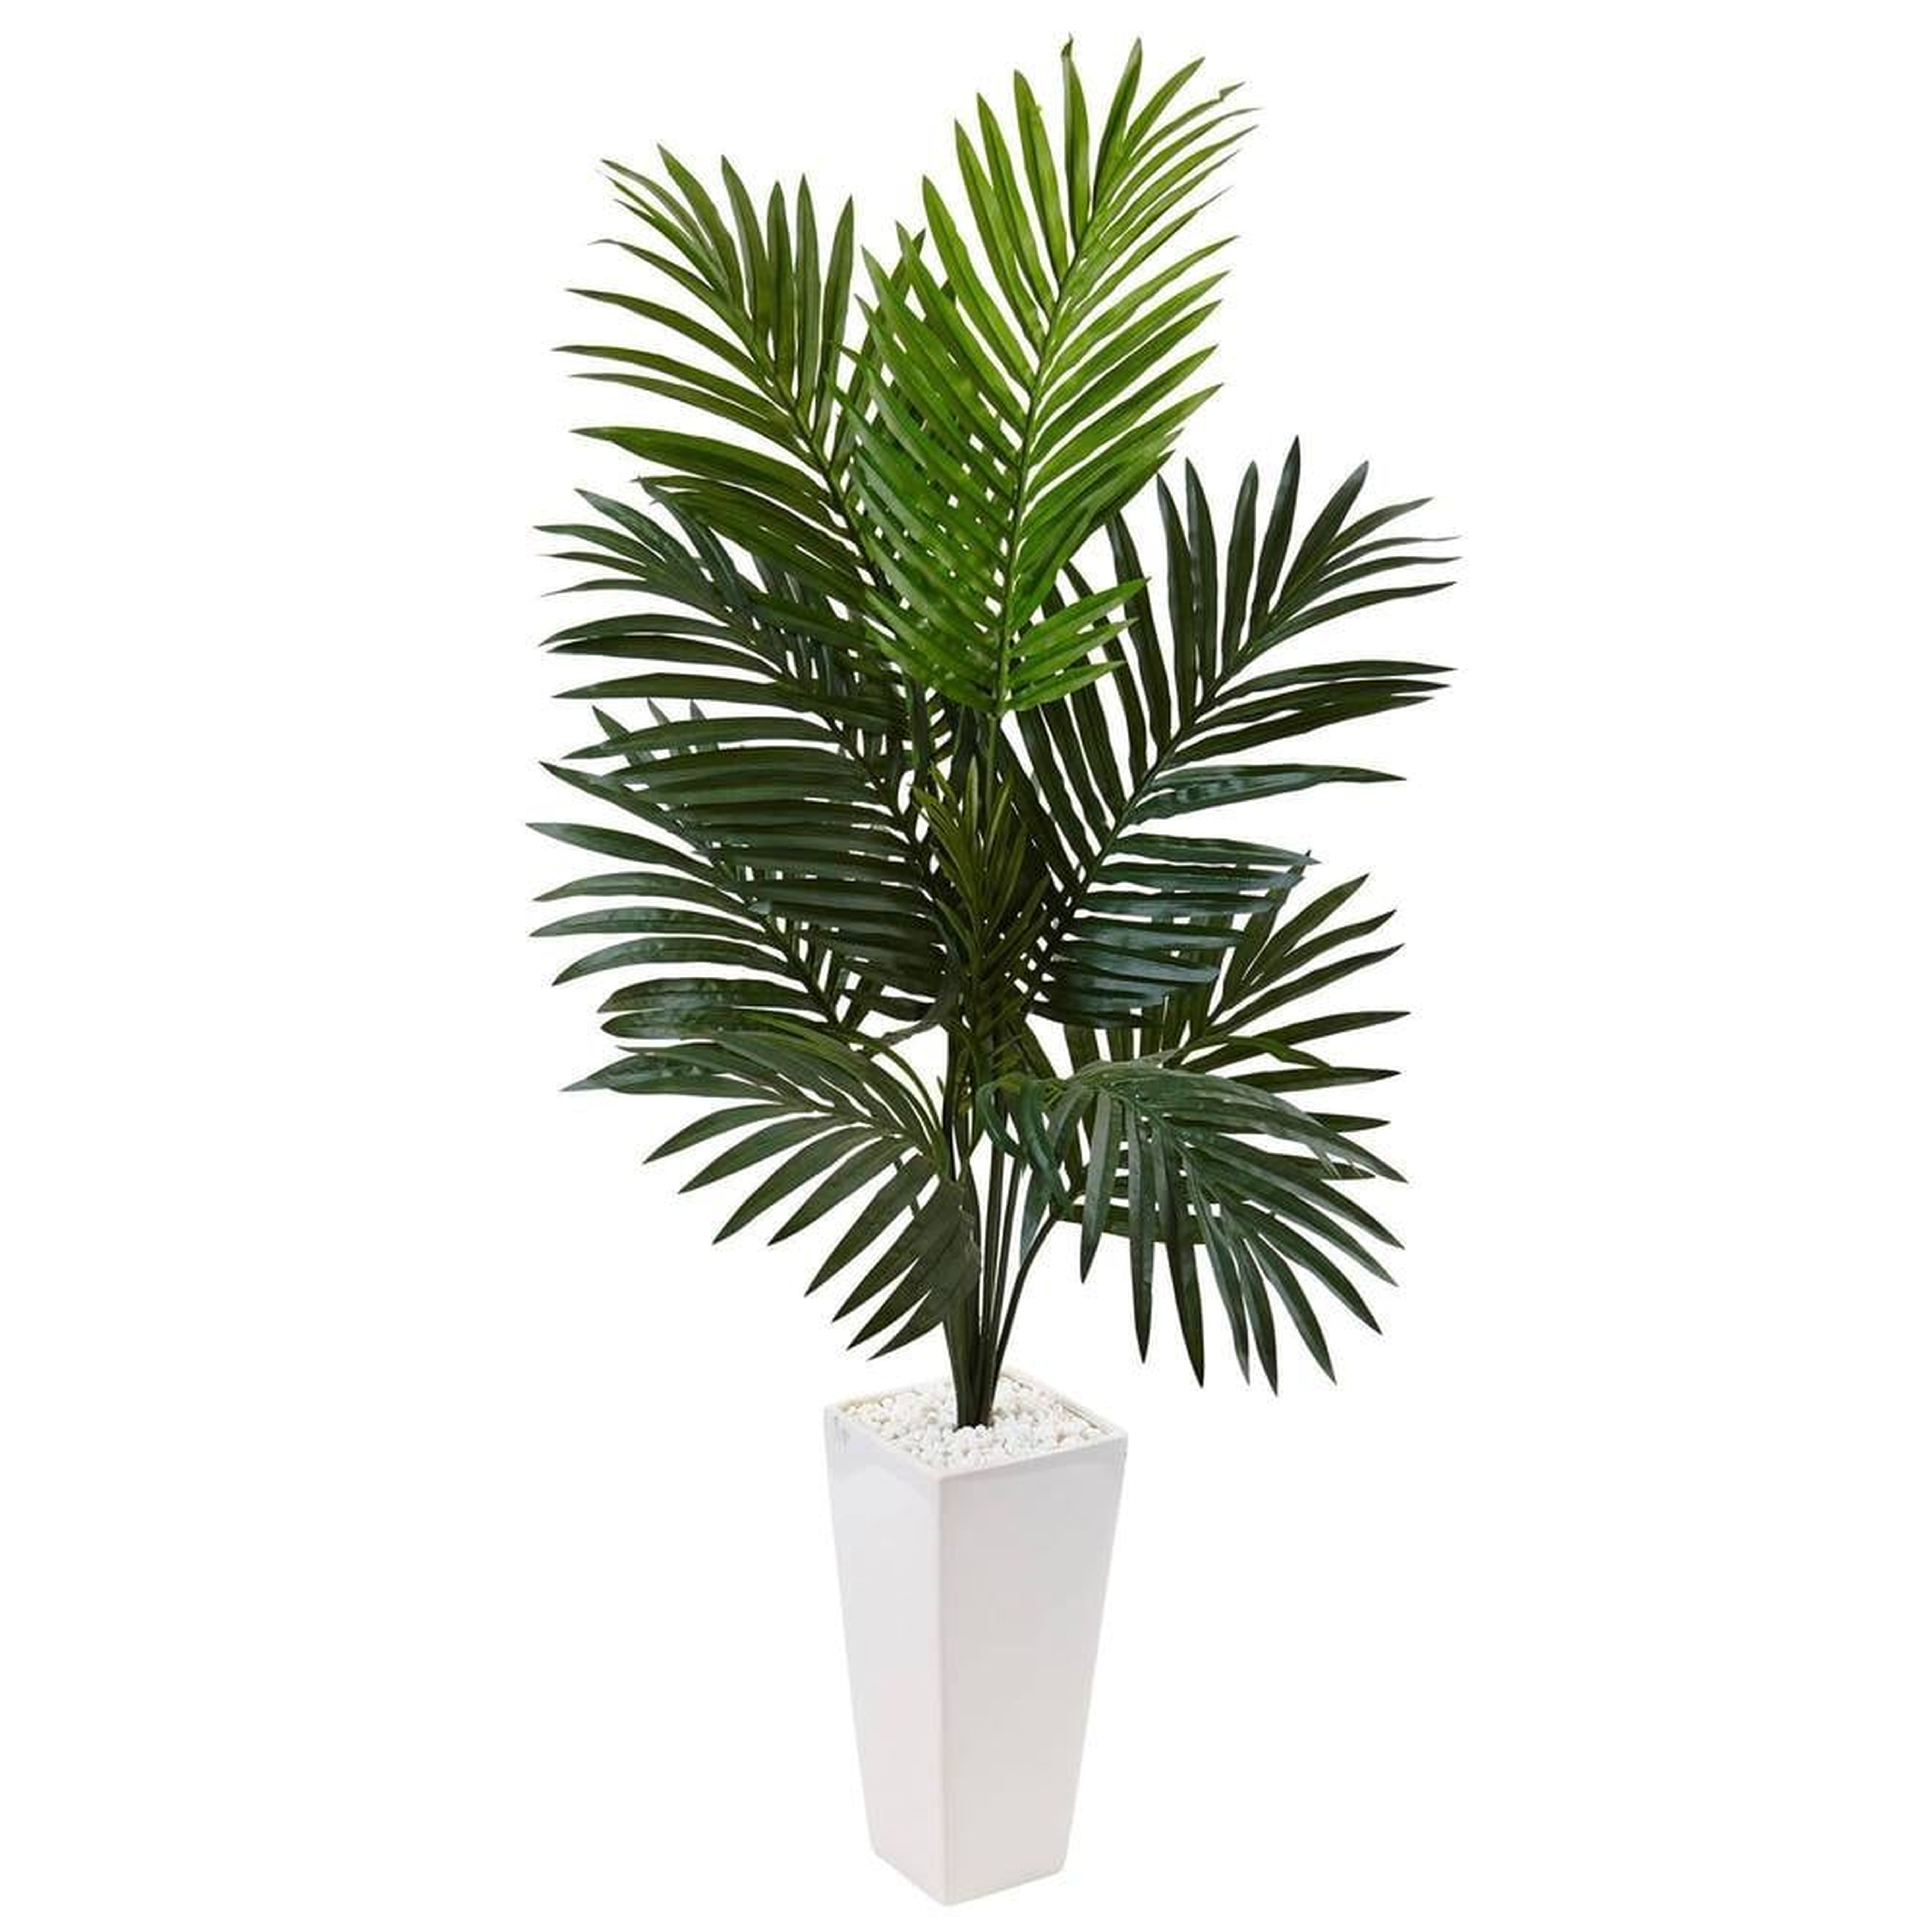 4.5’ Kentia Palm Tree in White Tower Planter - Fiddle + Bloom